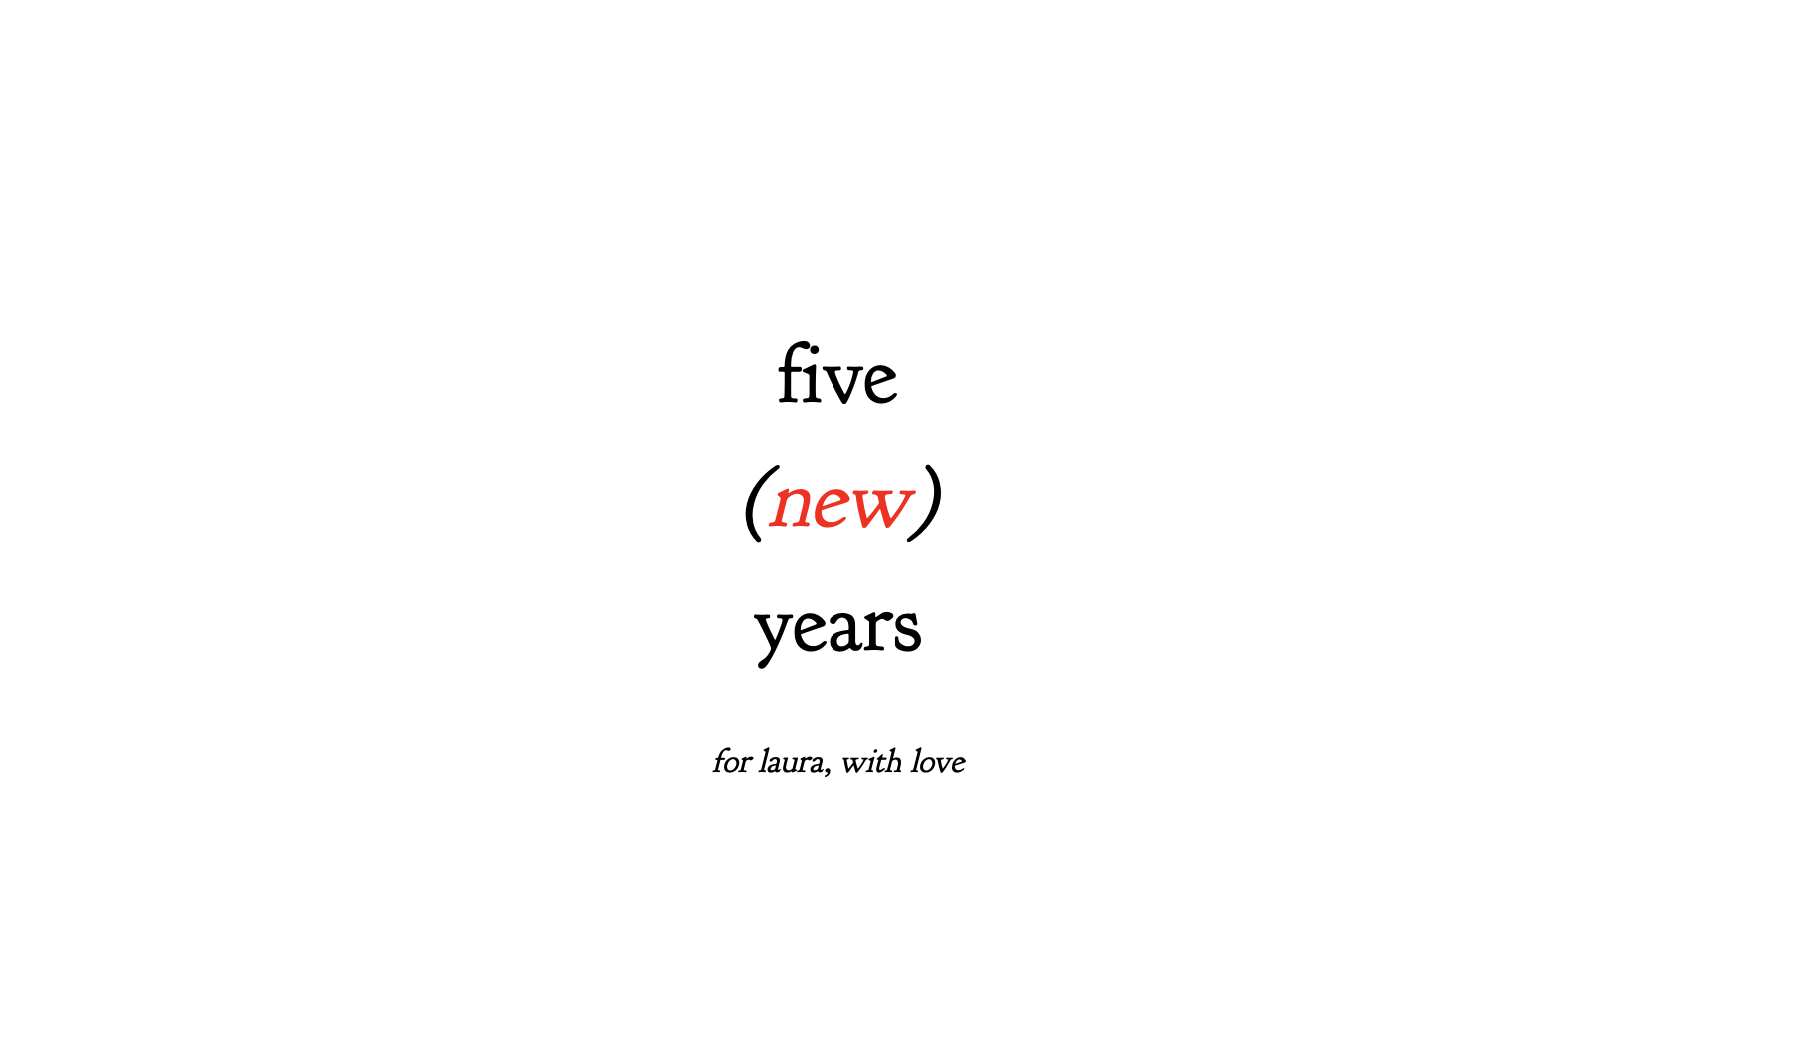 five (new) years